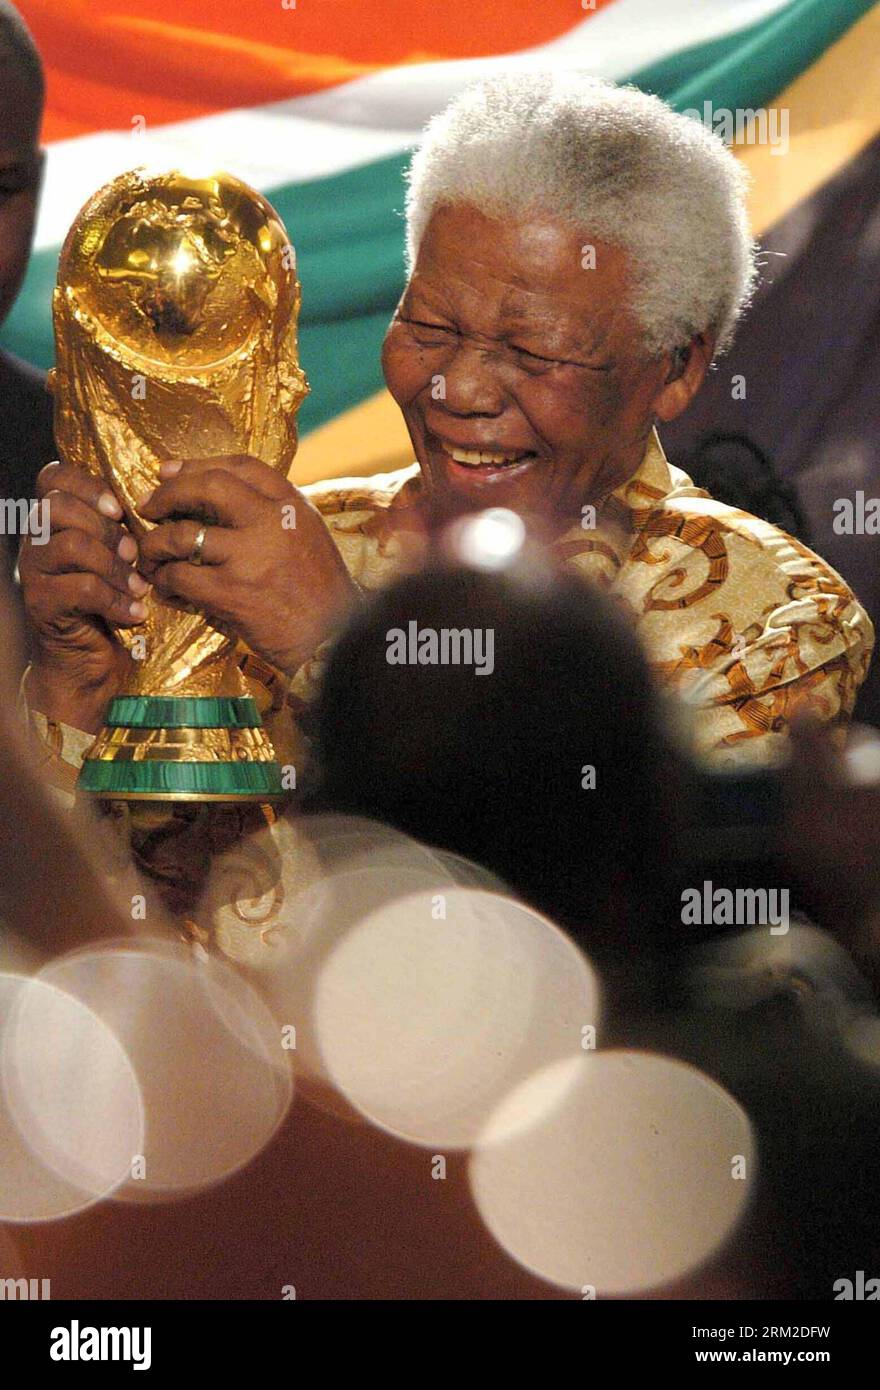 (130608) -- Zurich, May 15, 2004 (Xinhua) -- File photo taken on May 15, 2004 shows the former president of South Africa Nelson Mandela (R) holding the Titan Cup as South Africa was announced to host the 2010 FIFA World Cup in Zurich, Switzerland. Former South African President Nelson Mandela is in serious but stable condition after being taken to a hospital to be treated for a lung infection, the government said Saturday, prompting an outpouring of concern from admirers of a man who helped to end white racist rule. (Xinhua/Qi Heng) (zhf) SOUTH AFRICA-MANDELA-HOSPITALIZATION PUBLICATIONxNOTxIN Stock Photo